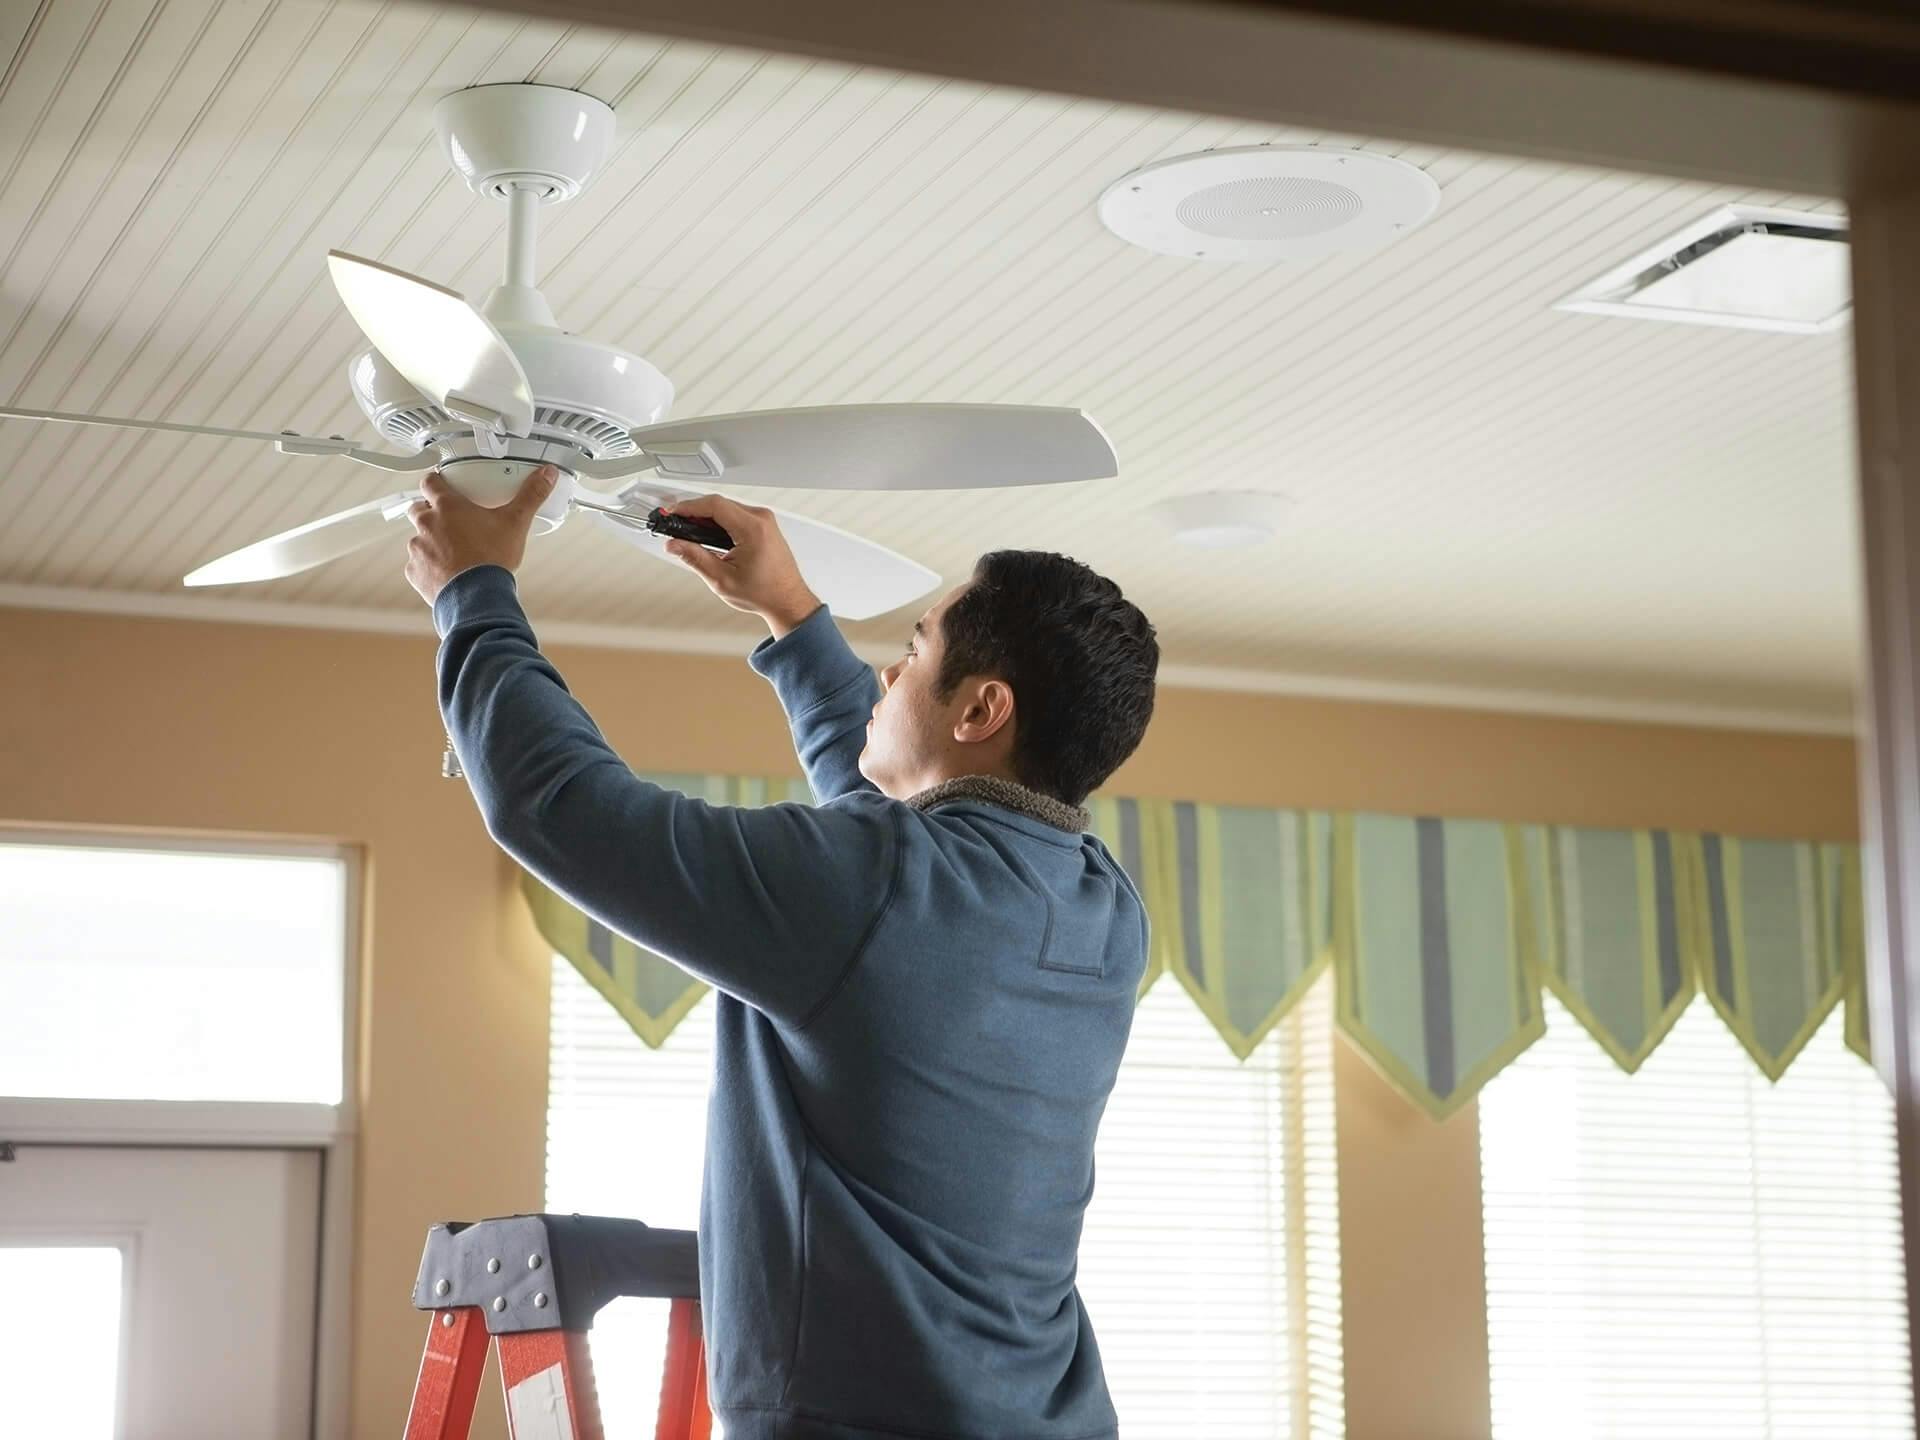 Contractor man on a ladder installing a white ceiling fan